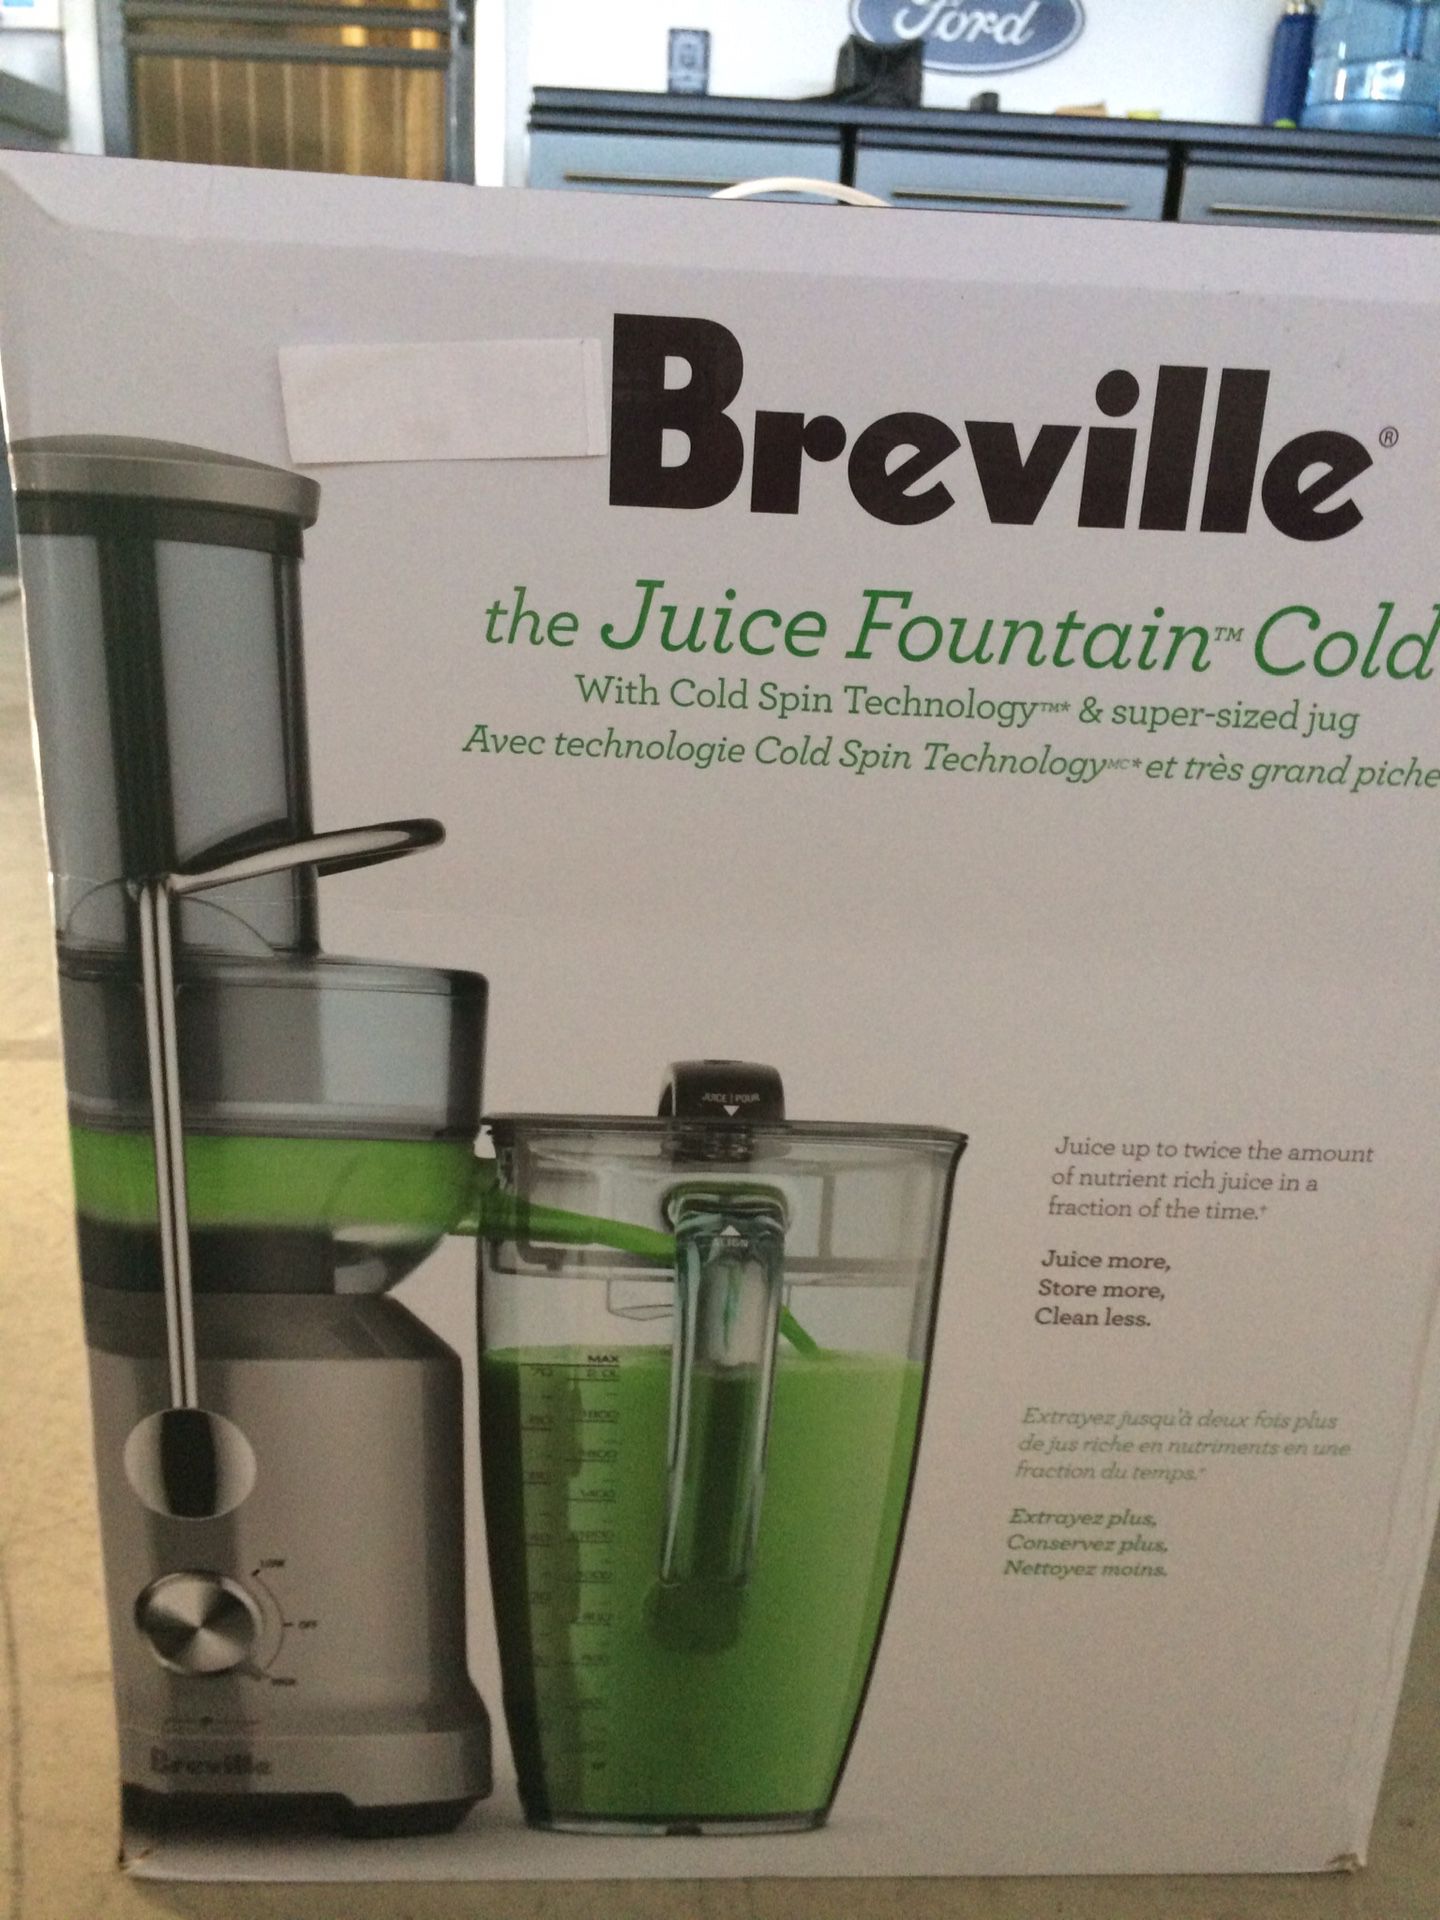 “Breville Juice Fountain Cold” juicer